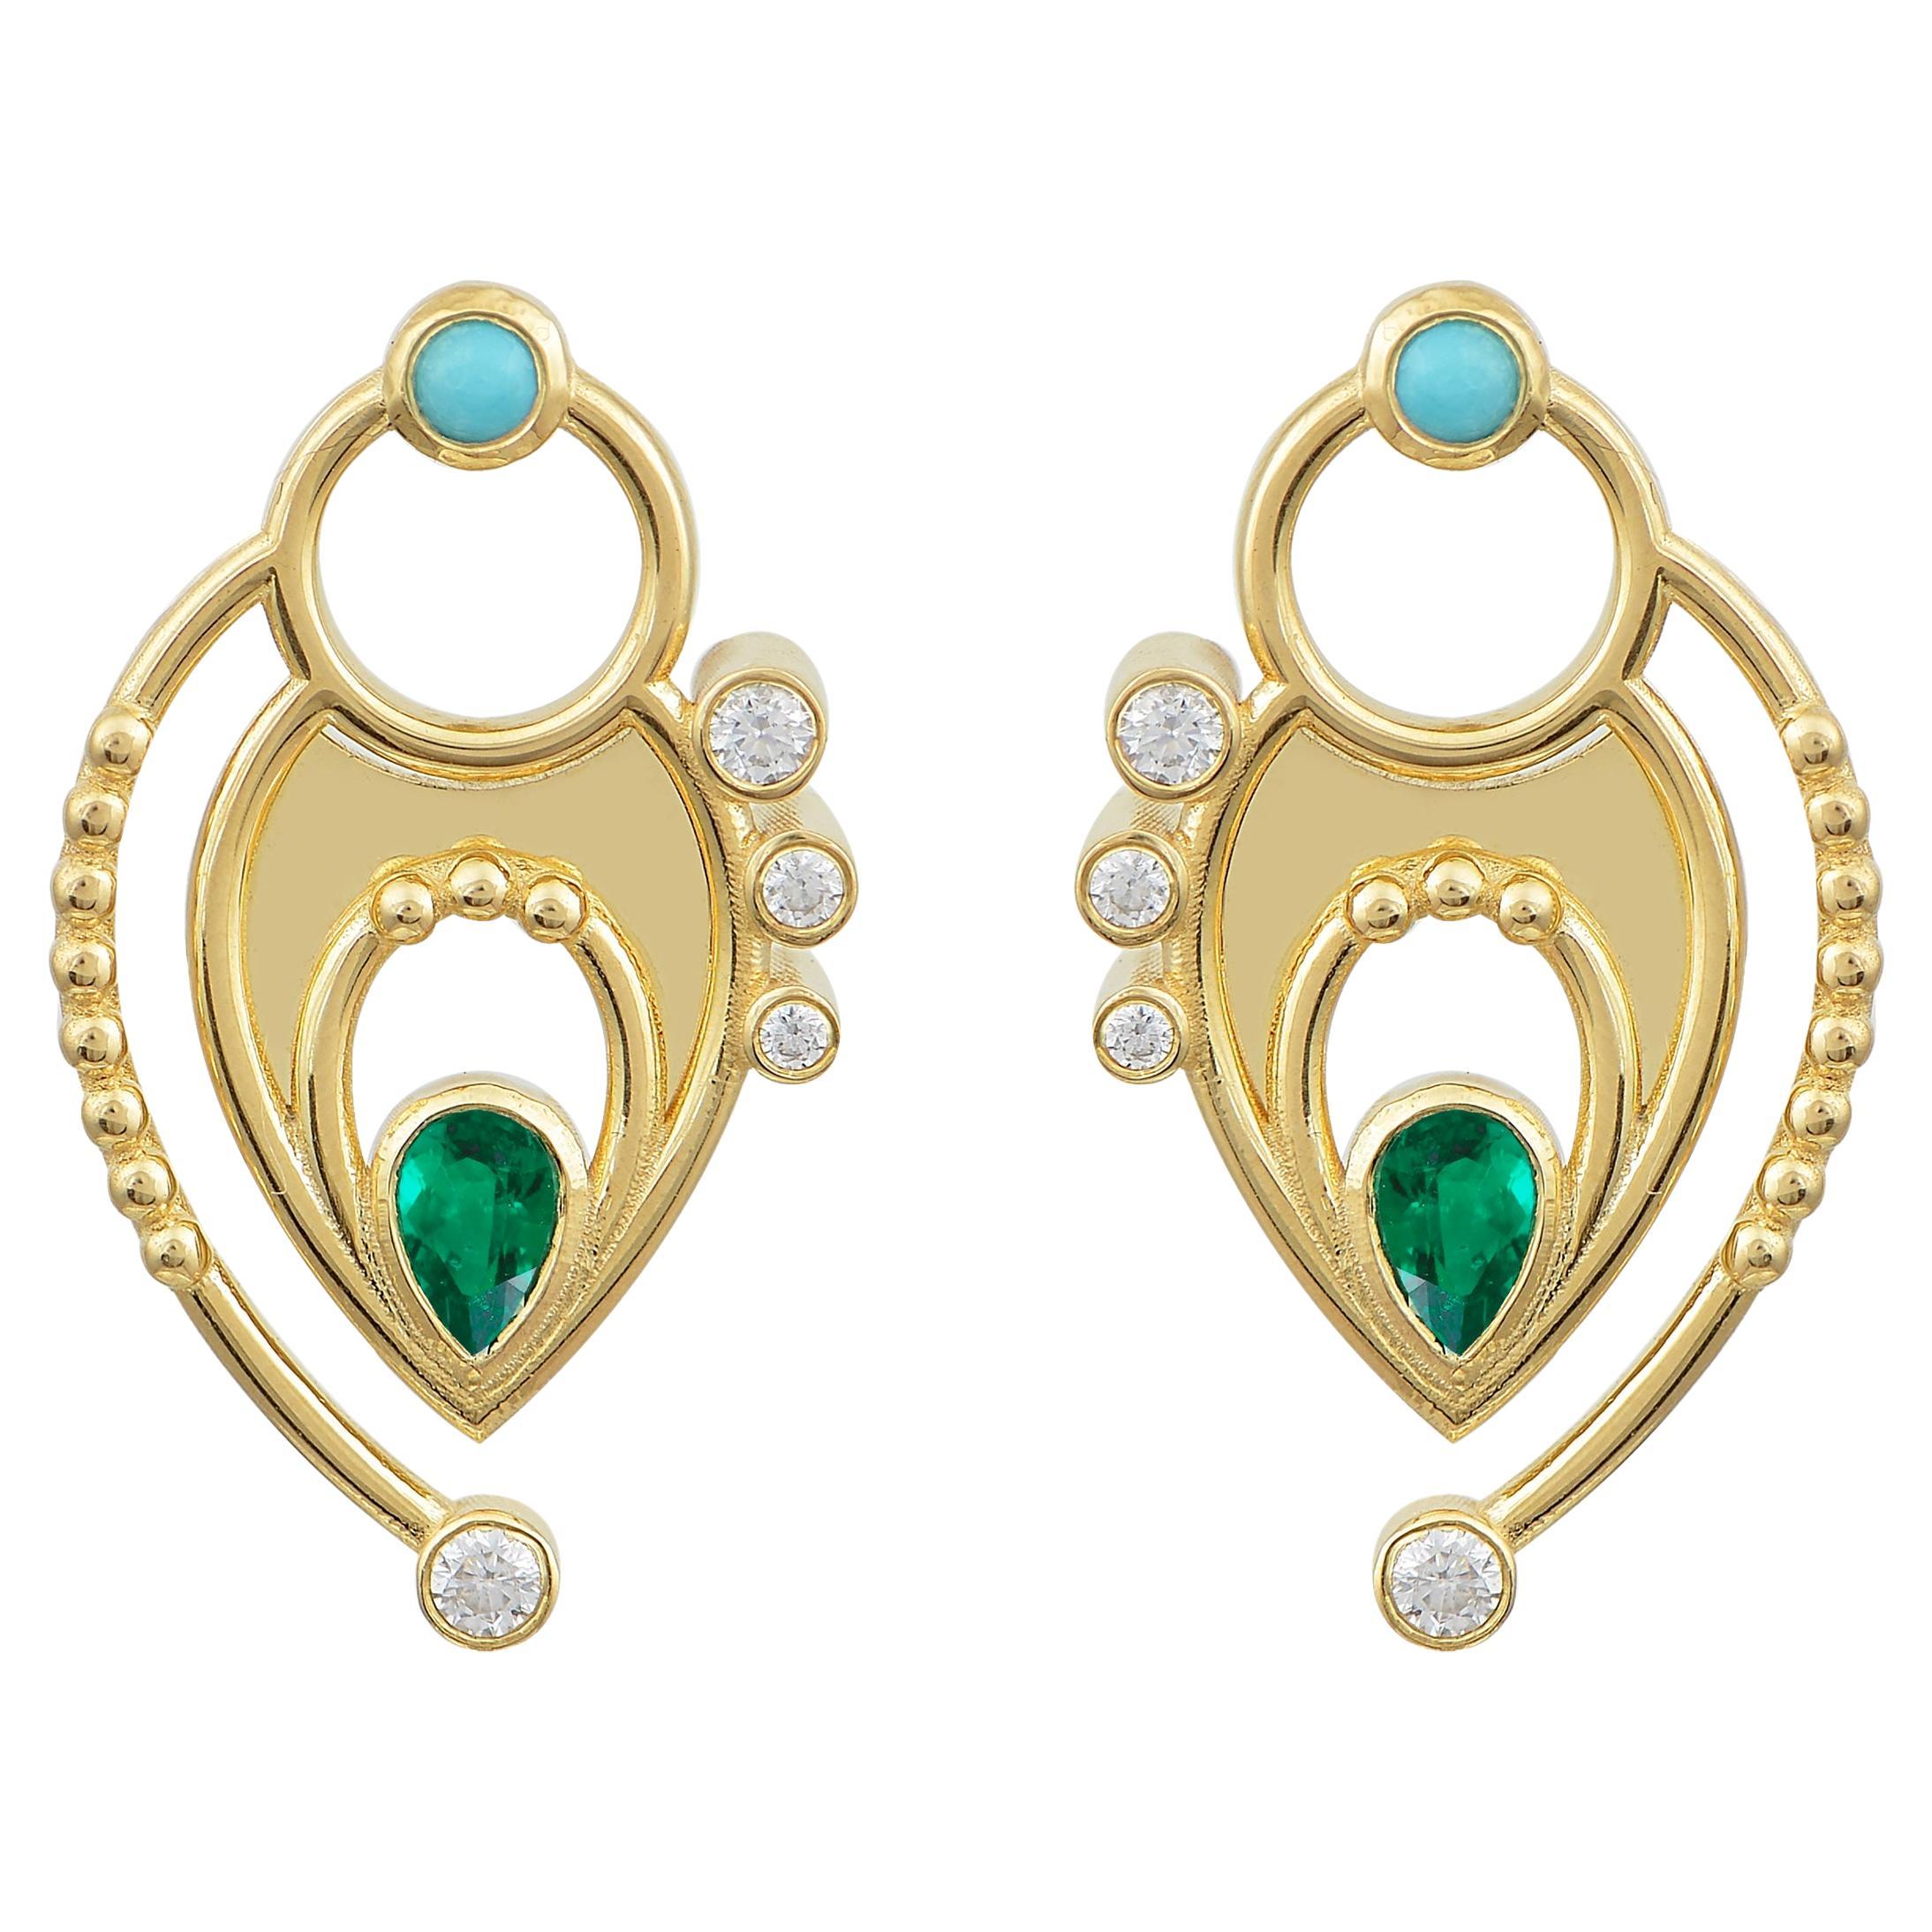 Pear Shaped Earrings in 18 Karat Yellow Gold with Diamonds, Emeralds, Turquoise